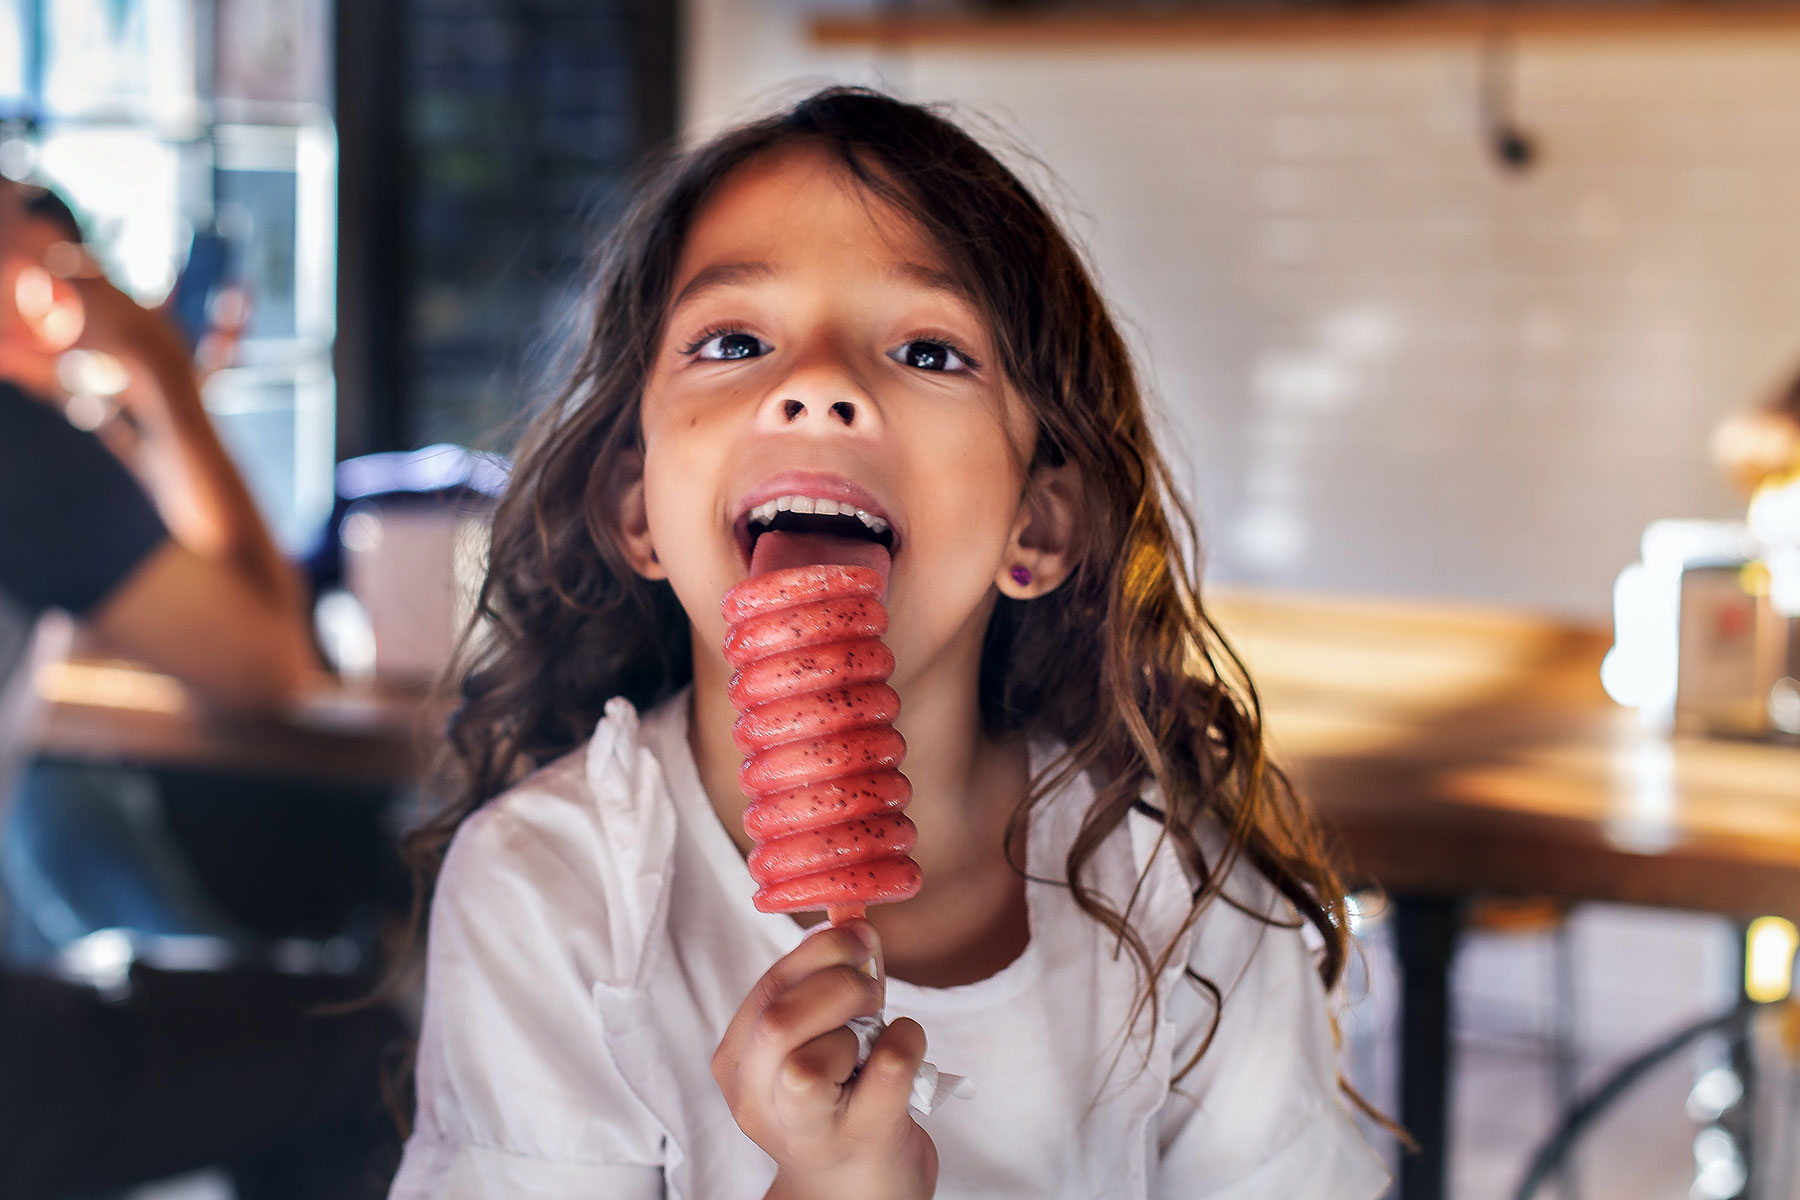 An image of a young girl licking a fruity ice lolly